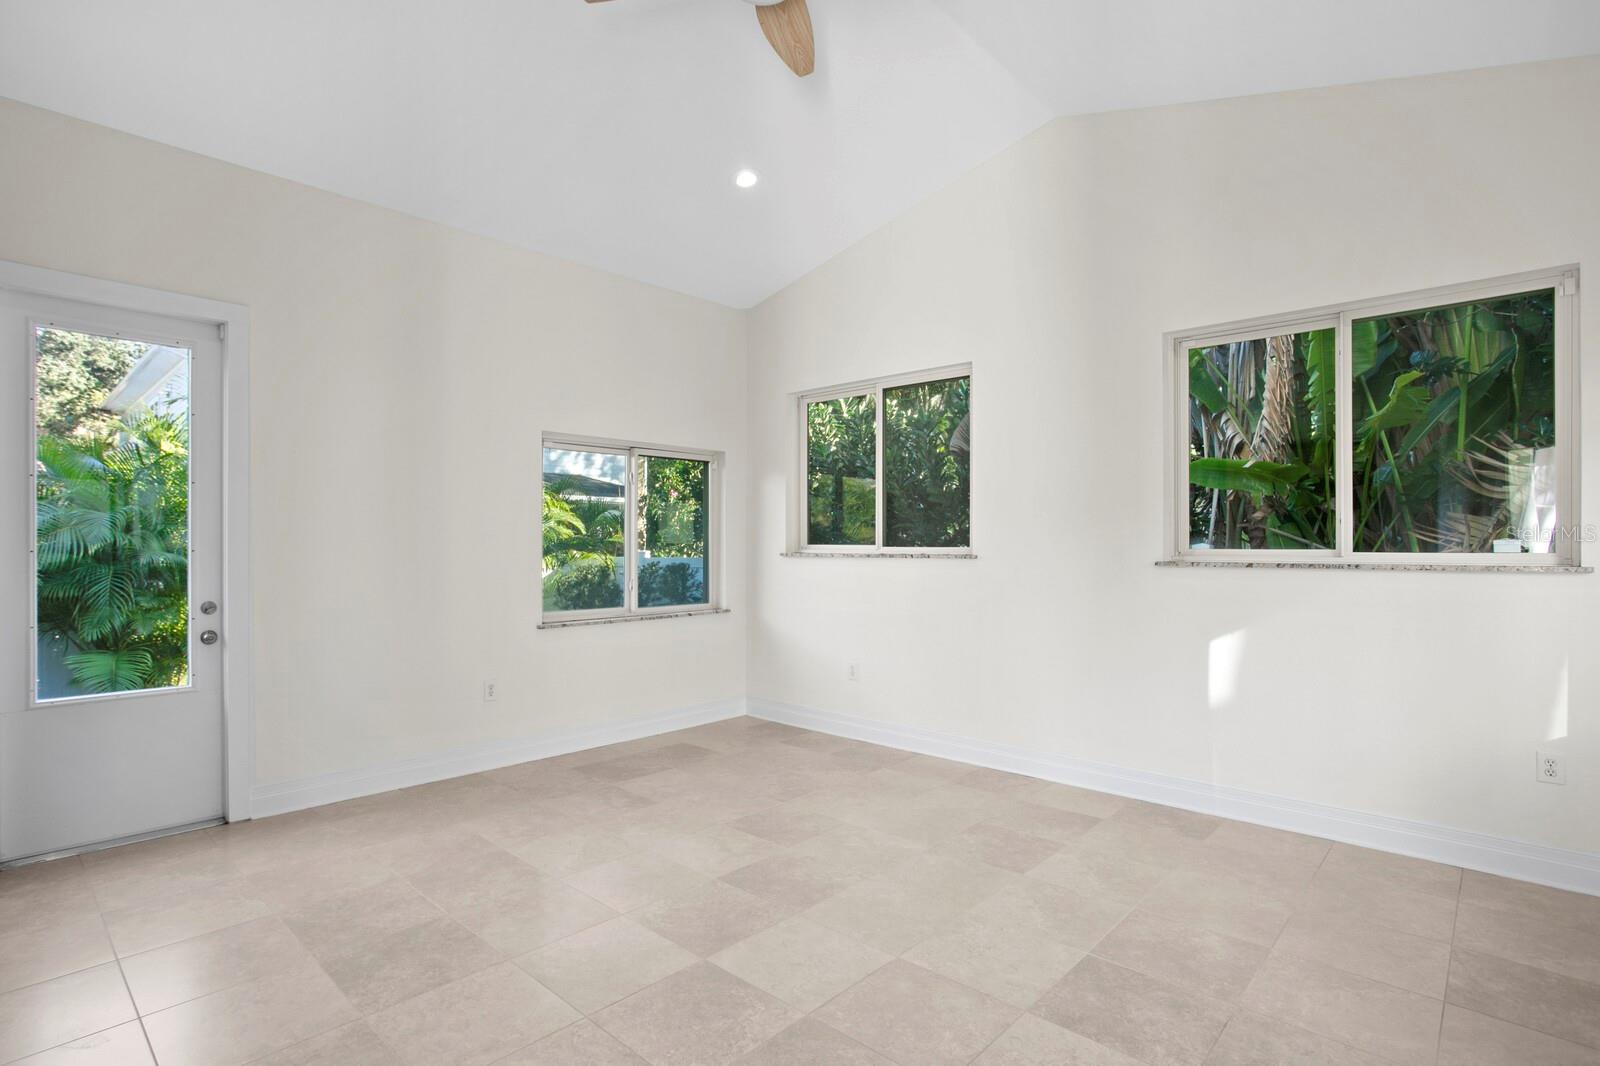 The bonus room is flooded with natural light and would make a perfect home office, gym or yoga studio